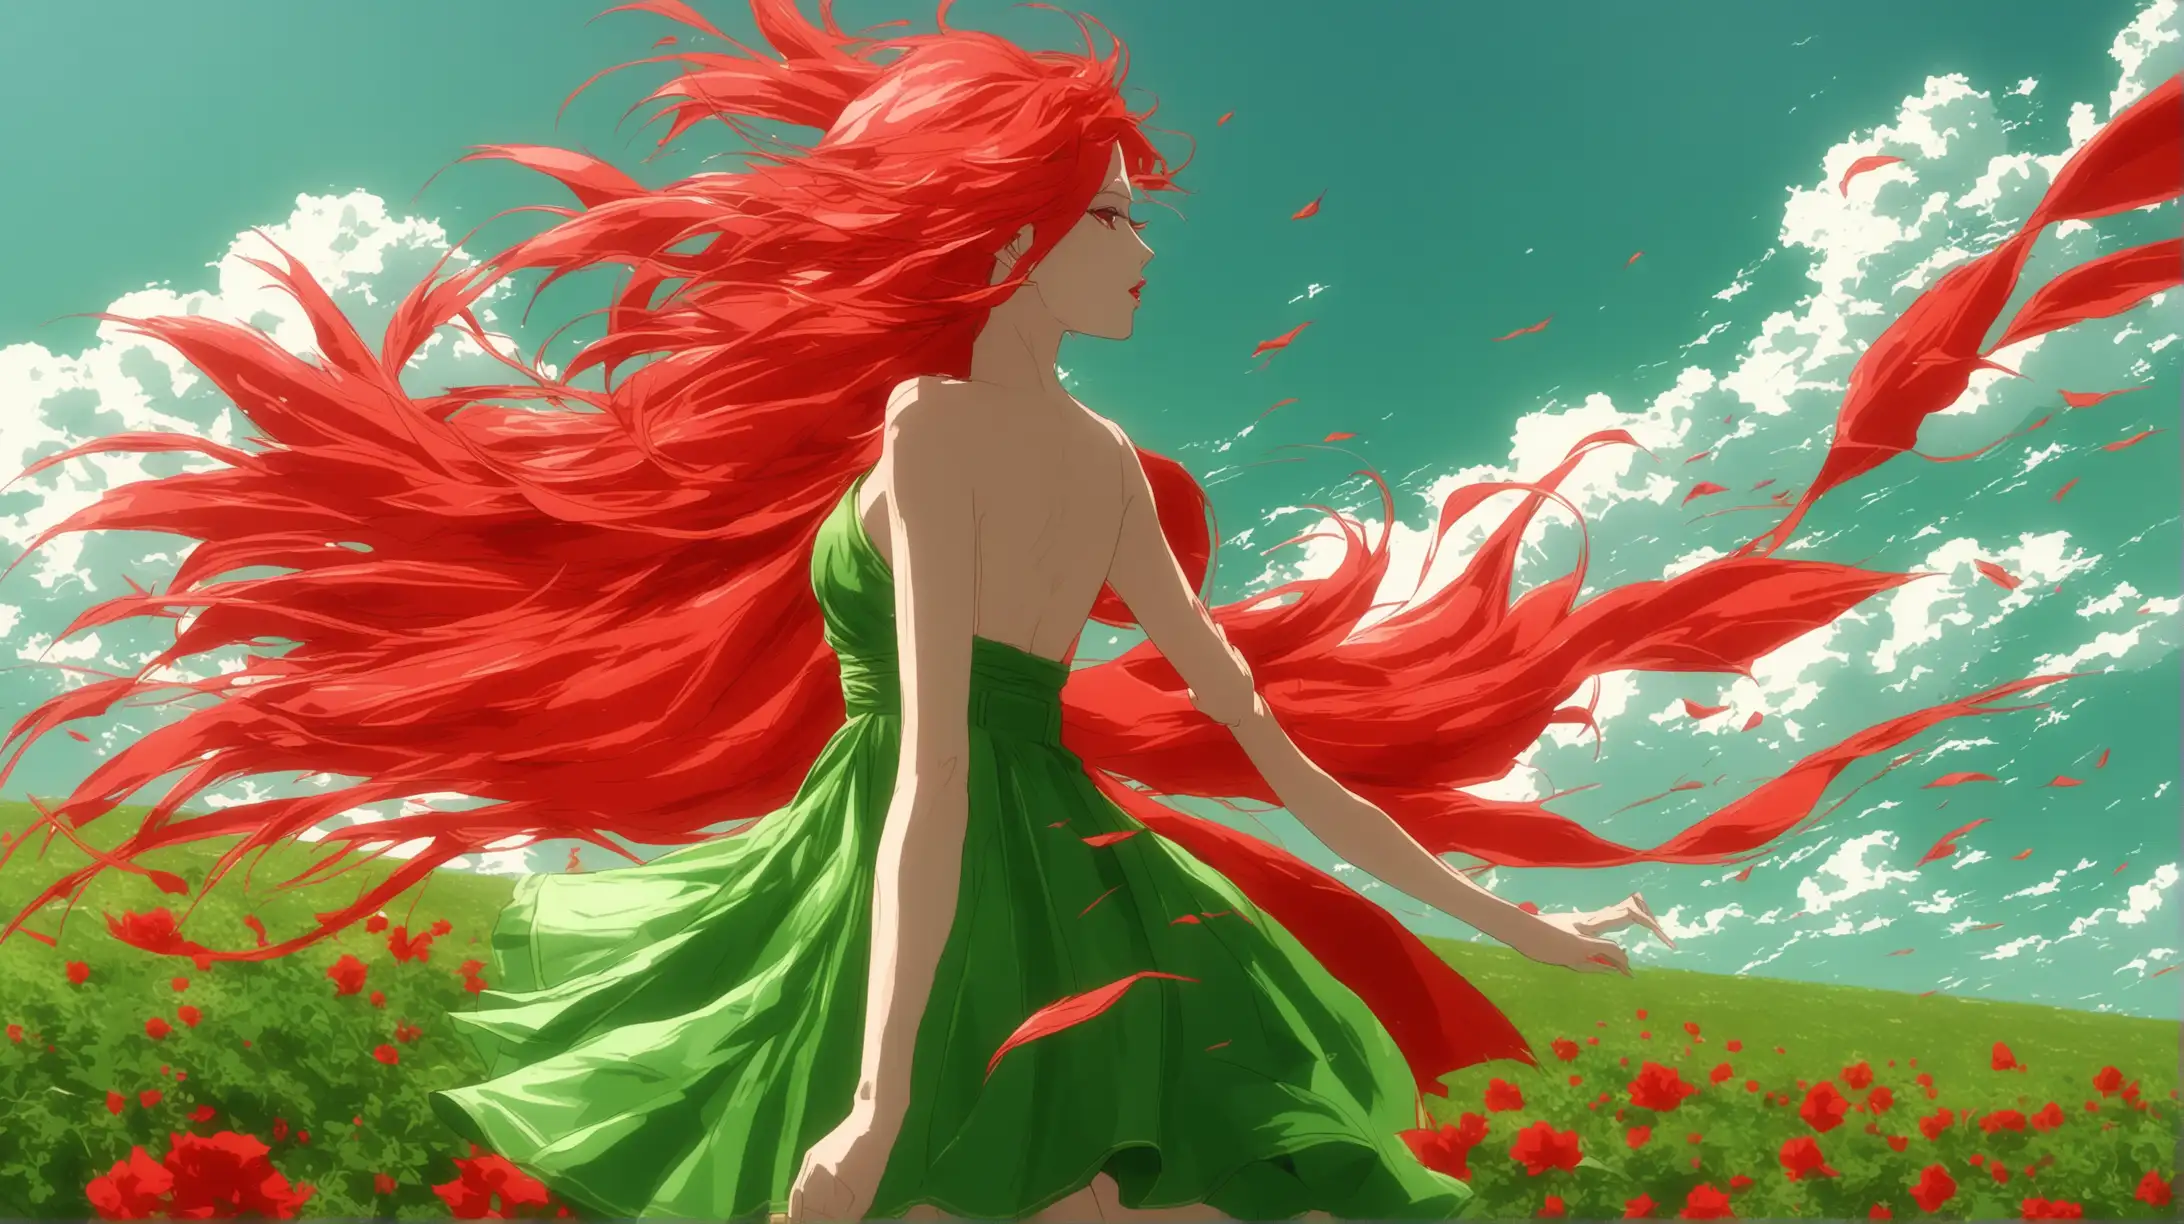 Summer Wind Blowing Red and Green Leaves